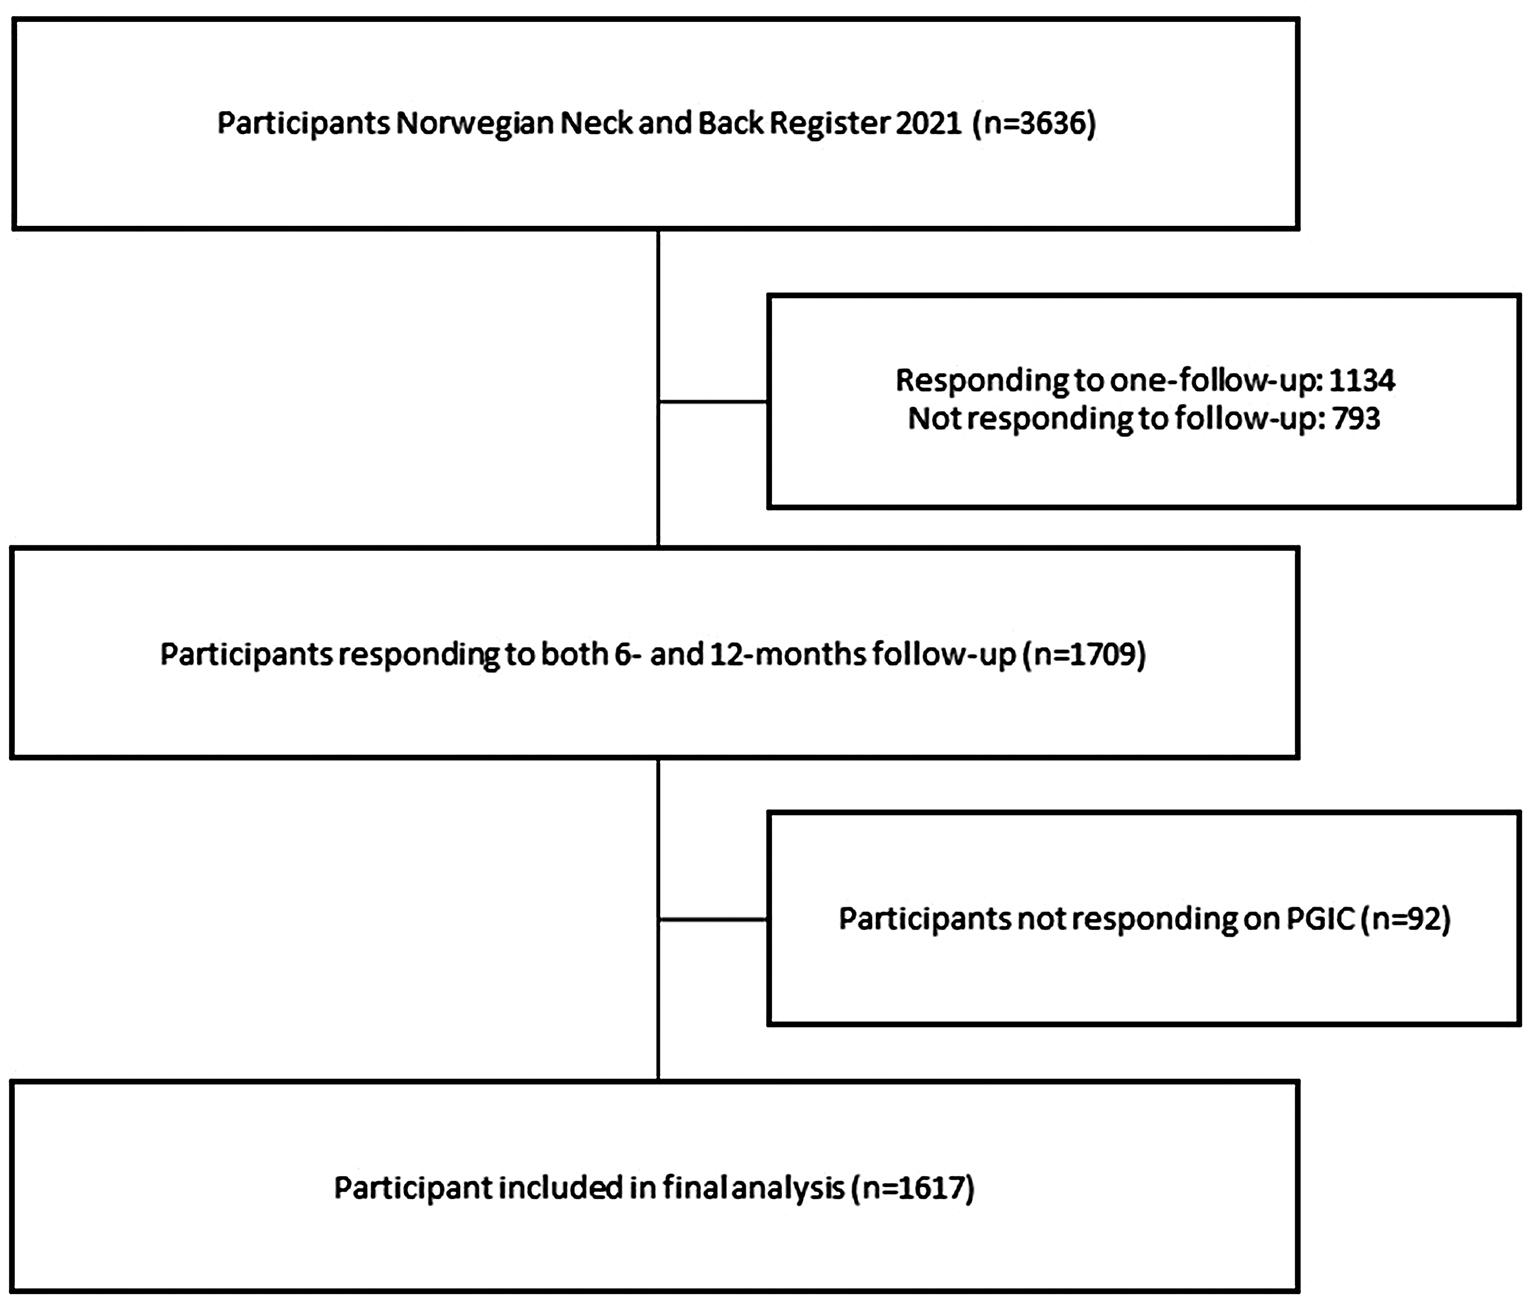 Responsiveness and minimal important change of specific and generic patient-reported outcome measures for back patients: the Norwegian Neck and Back Register